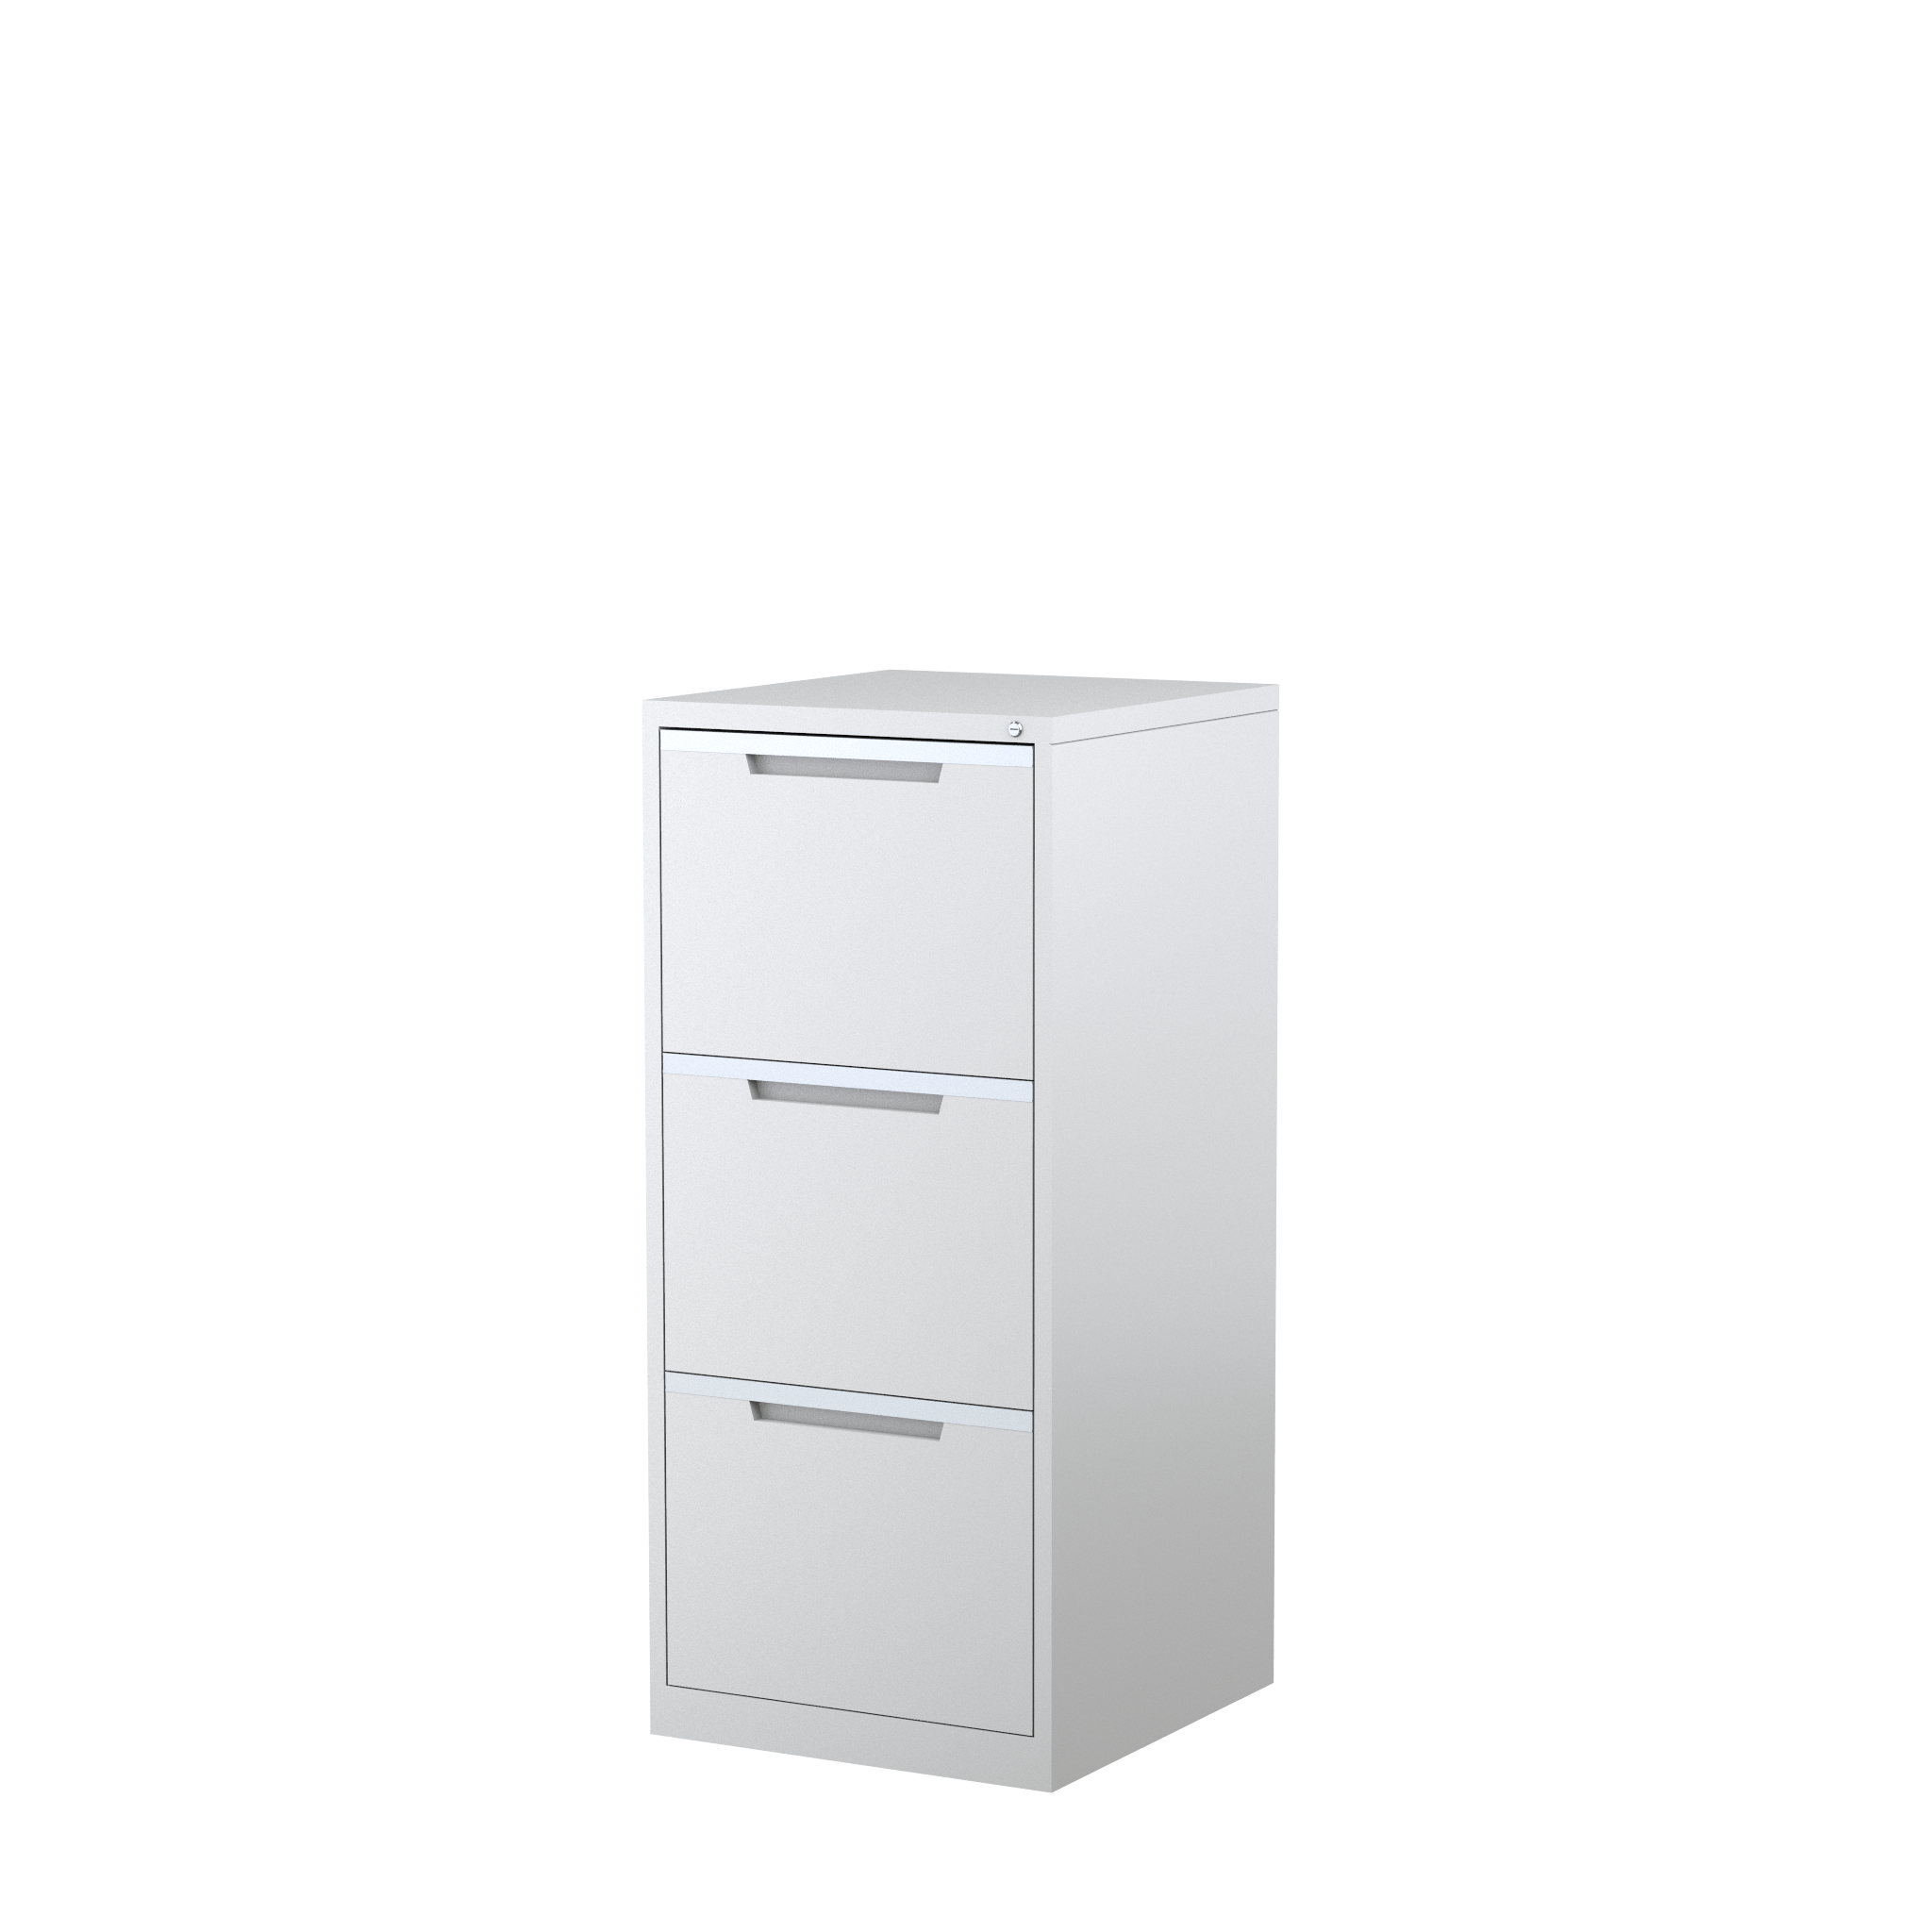 VFA3 - STEELCO A3 - 3 Drawer VFC 1320H x 580W x 620D-WS.png